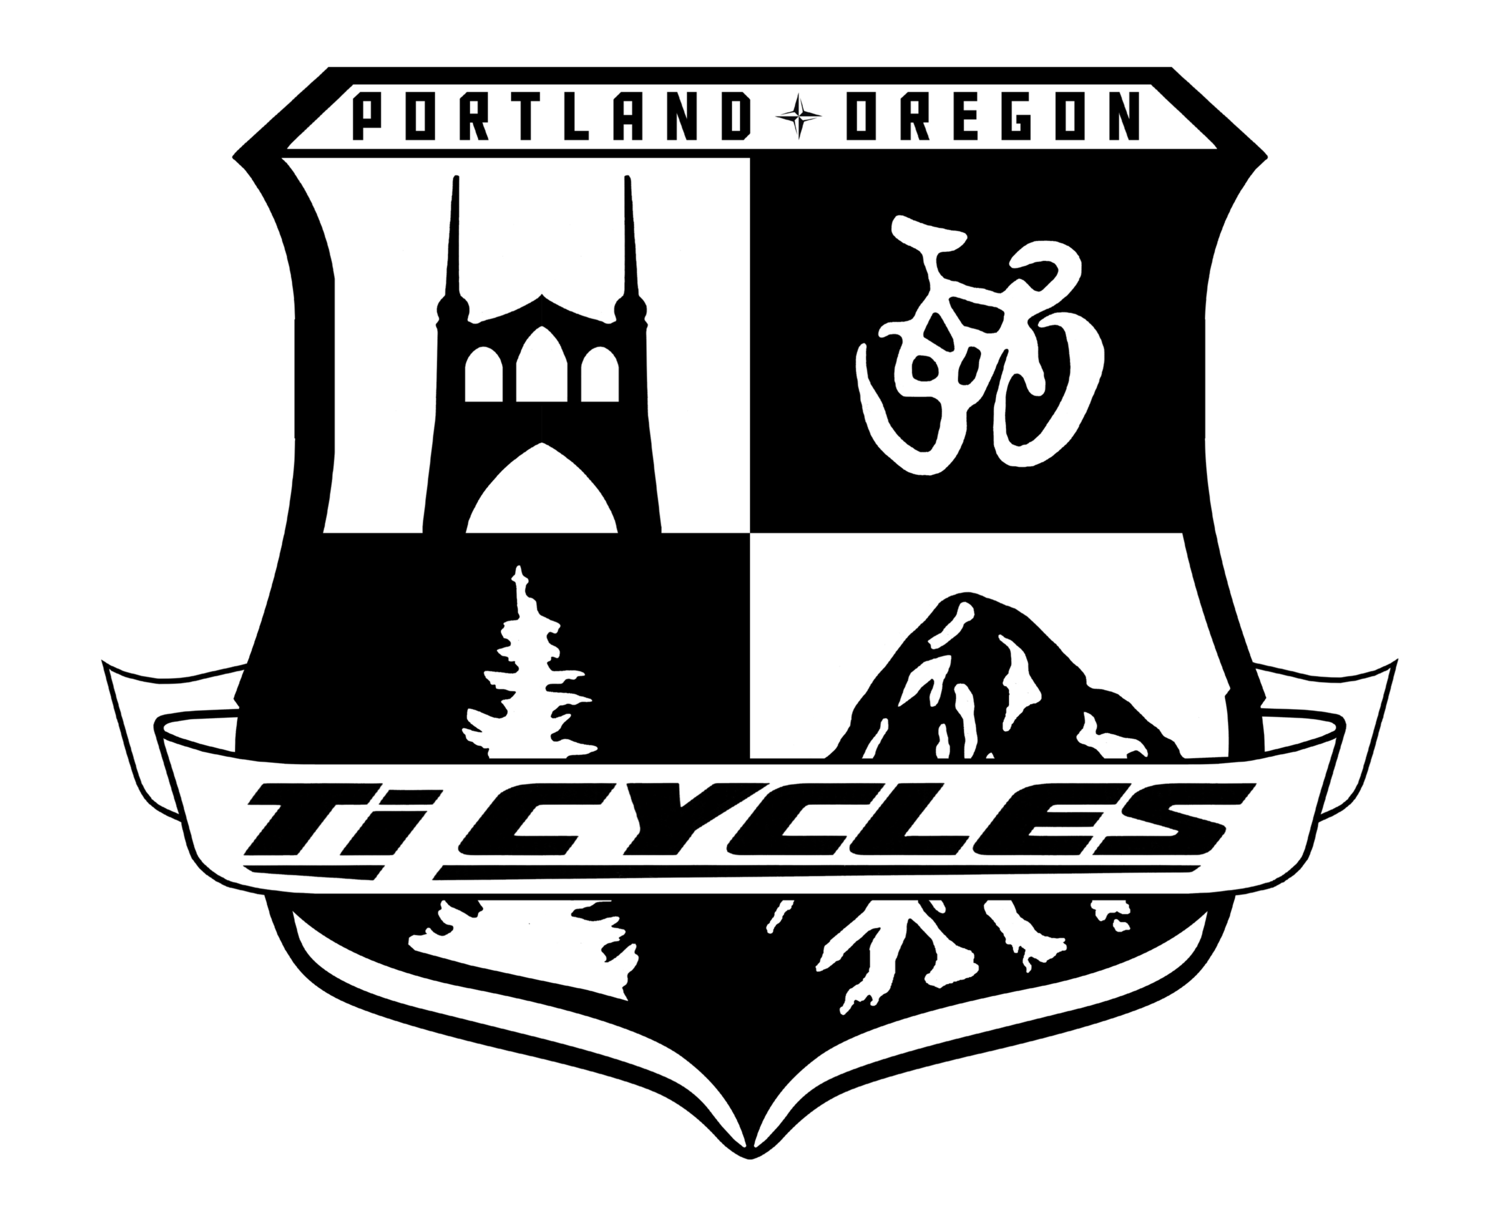 www.ticycles.com